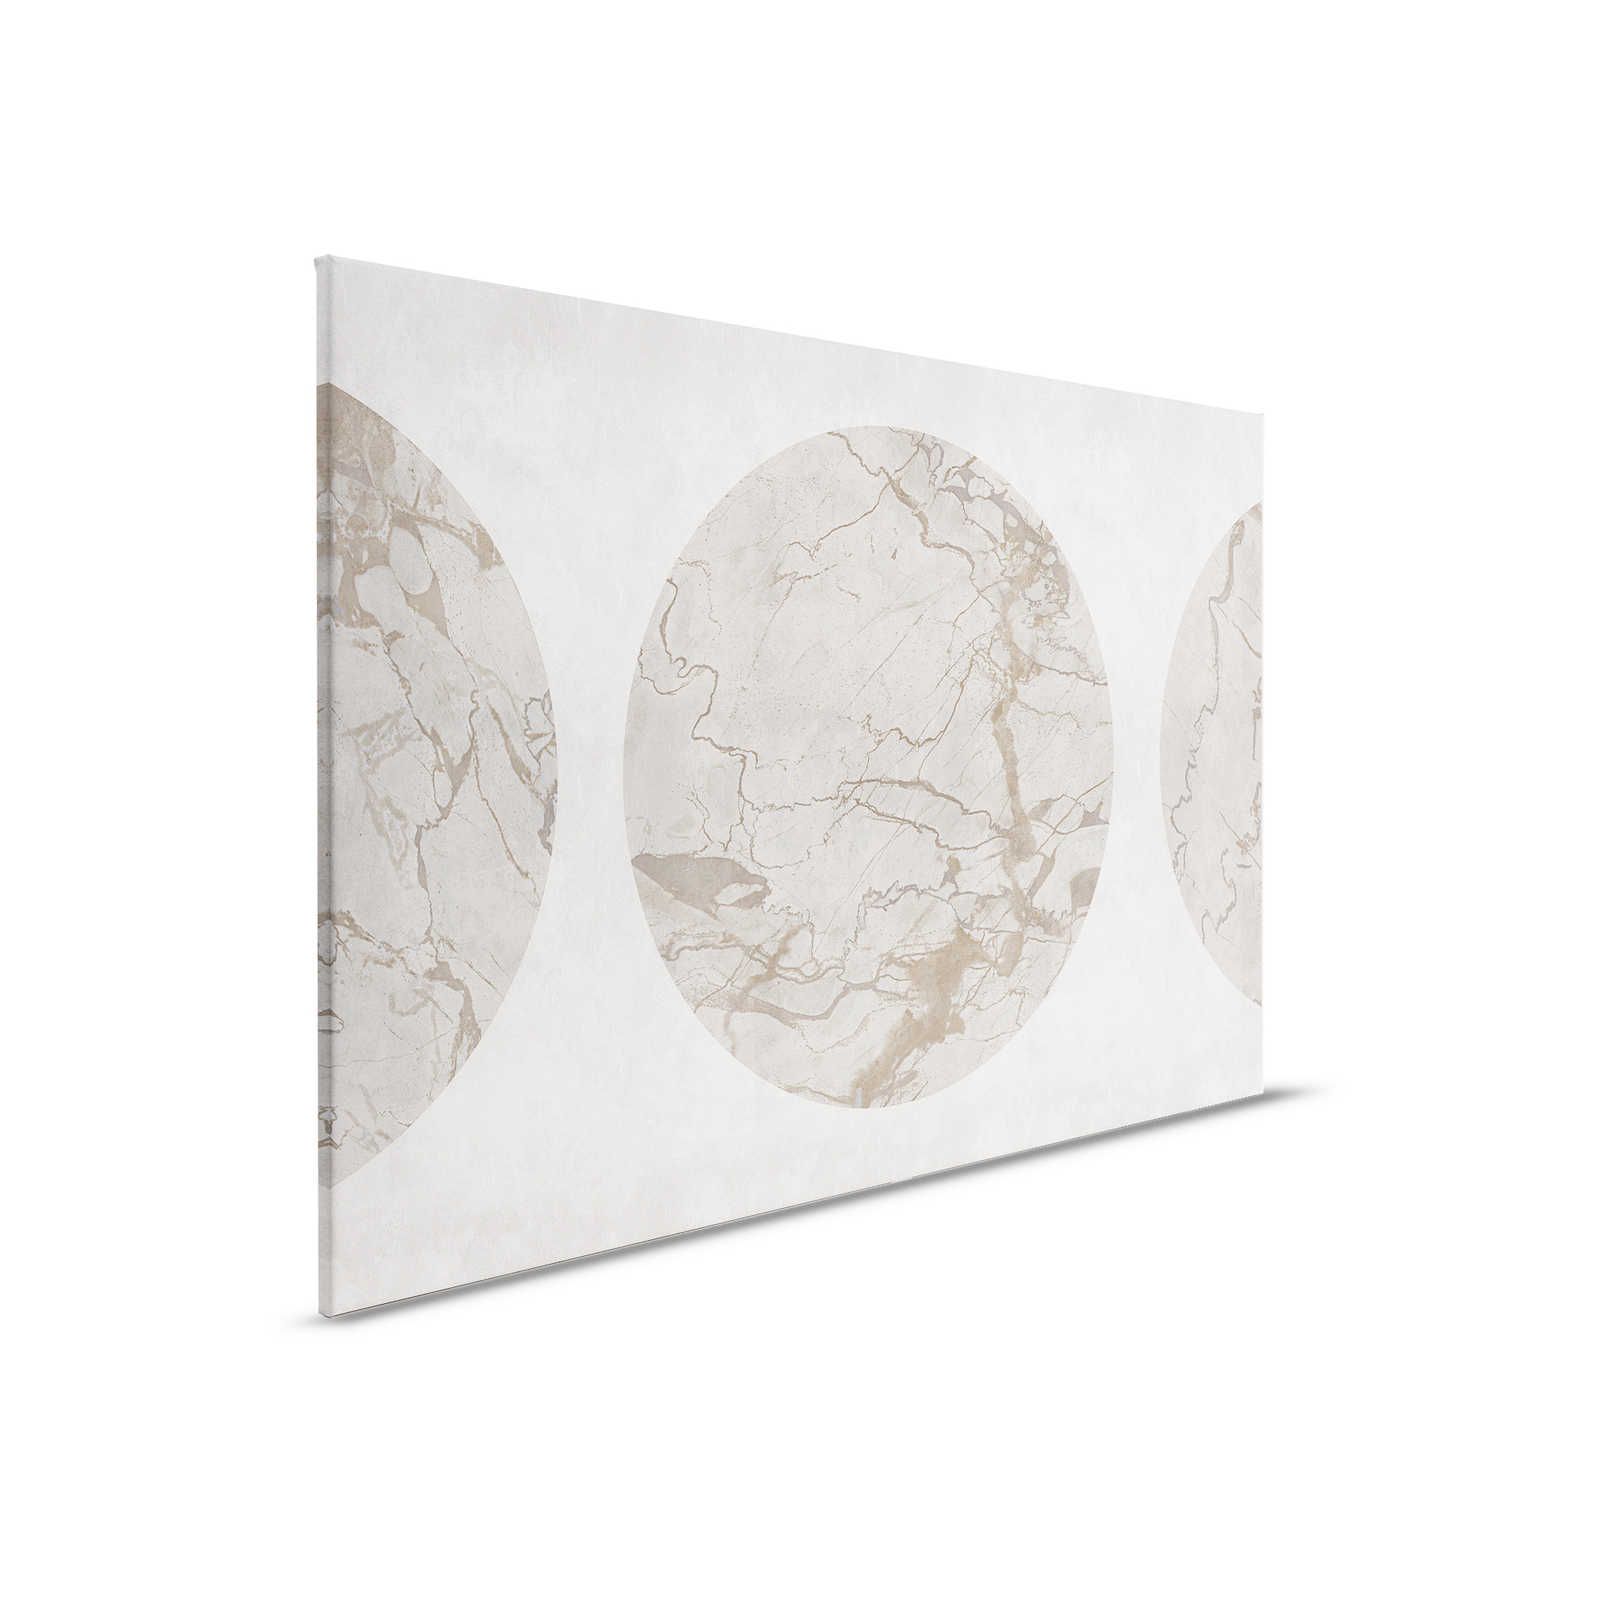         Mercurio 1 - Grey Marble Greige Canvas Painting with Circle Motif - 0.90 m x 0.60 m
    